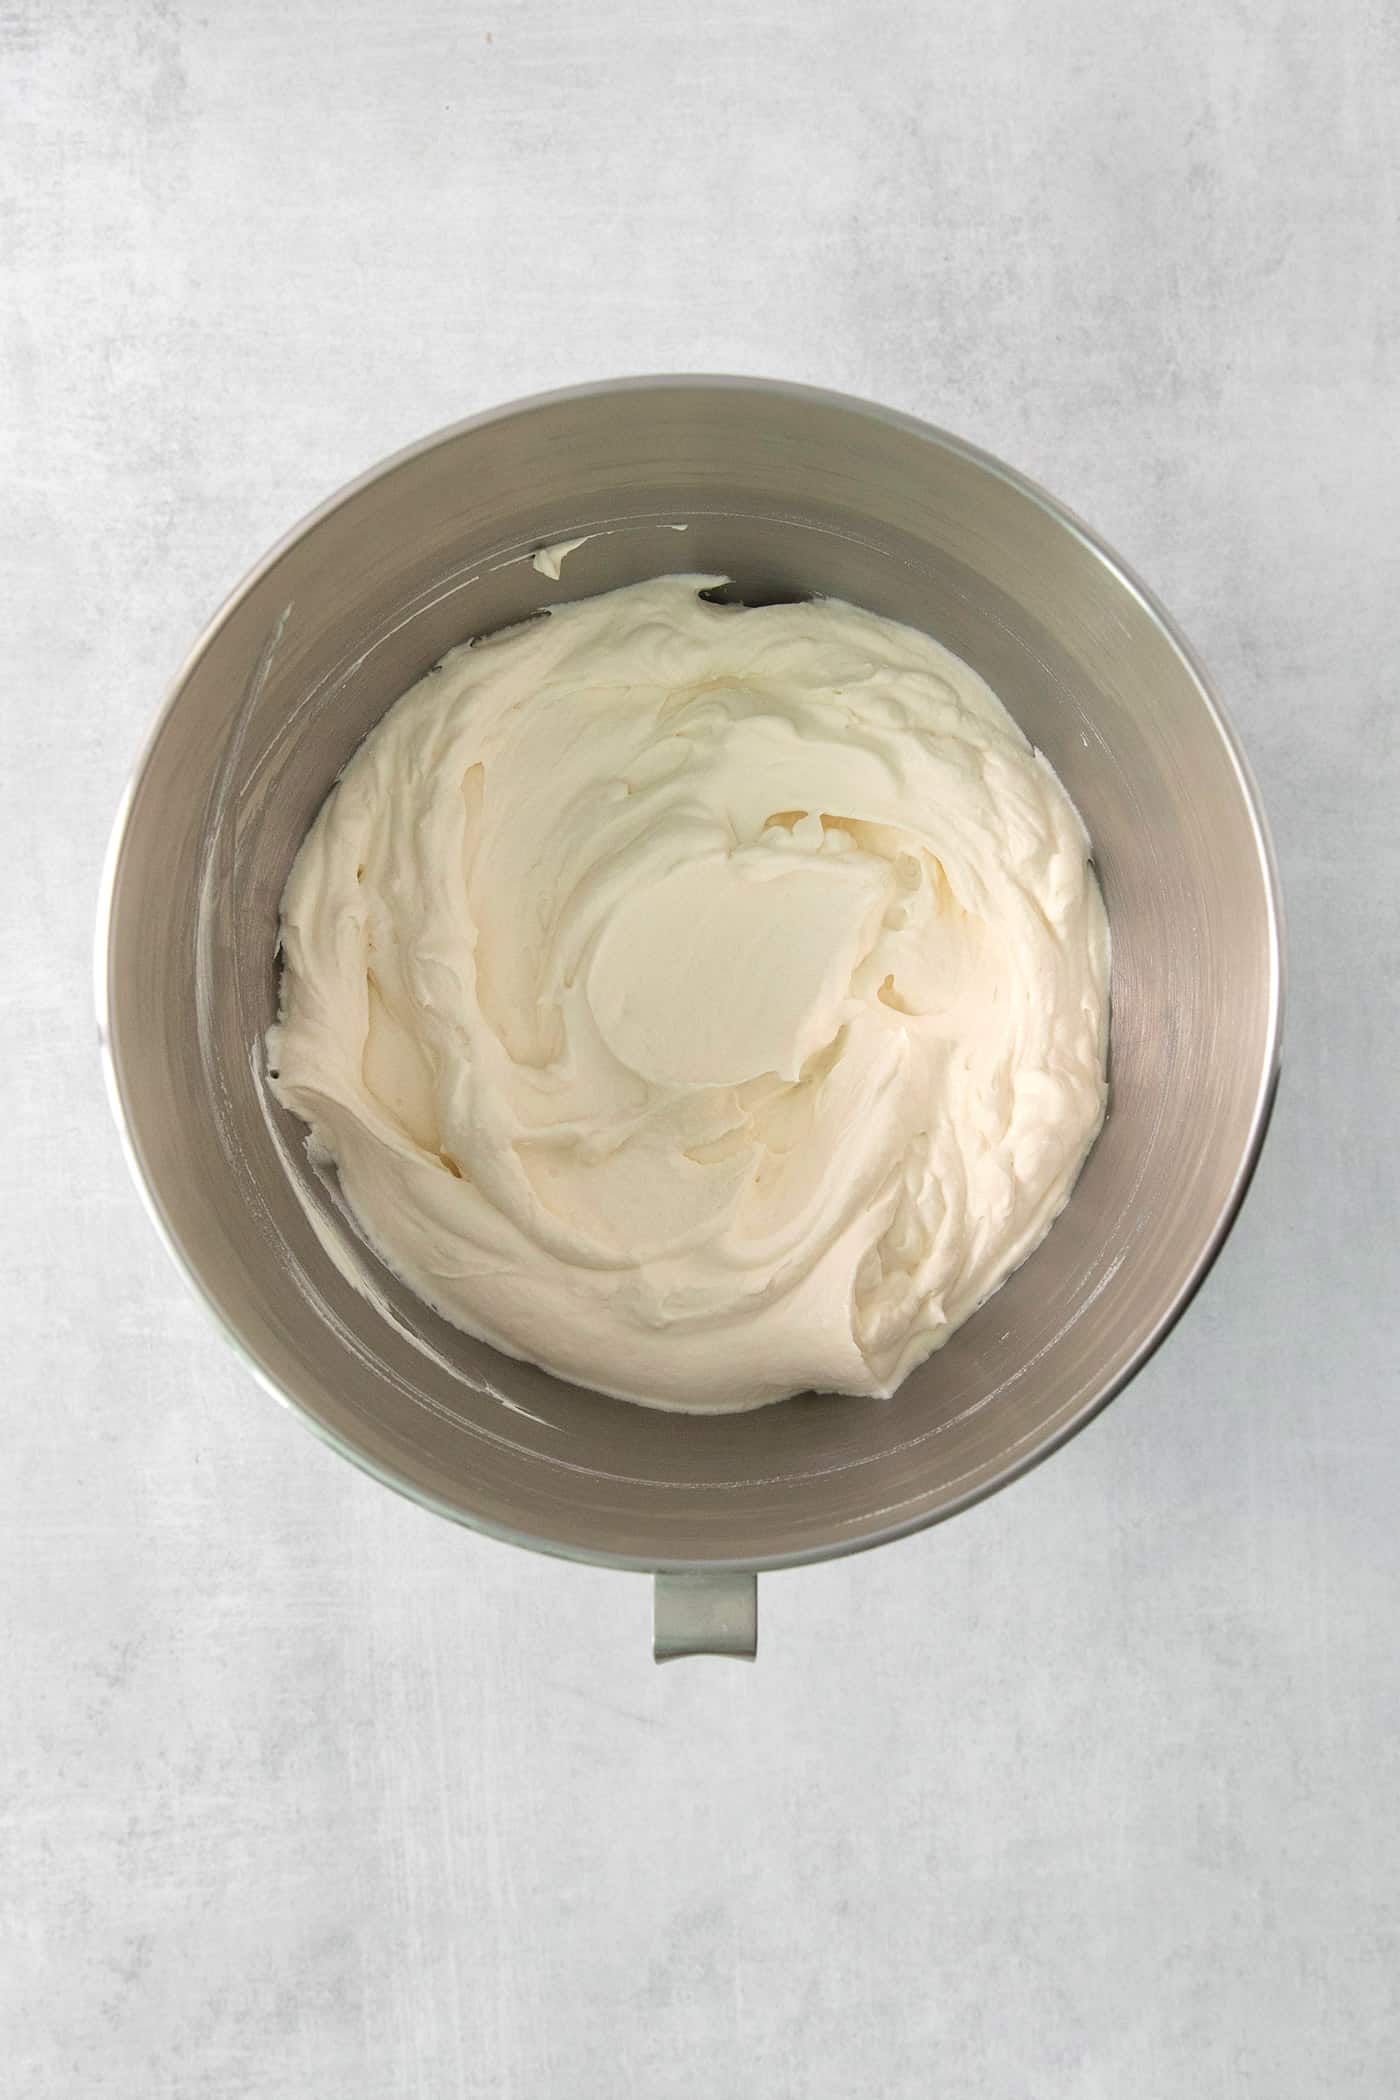 Whipped Chantilly cream is shown in the bowl of a stand mixer.